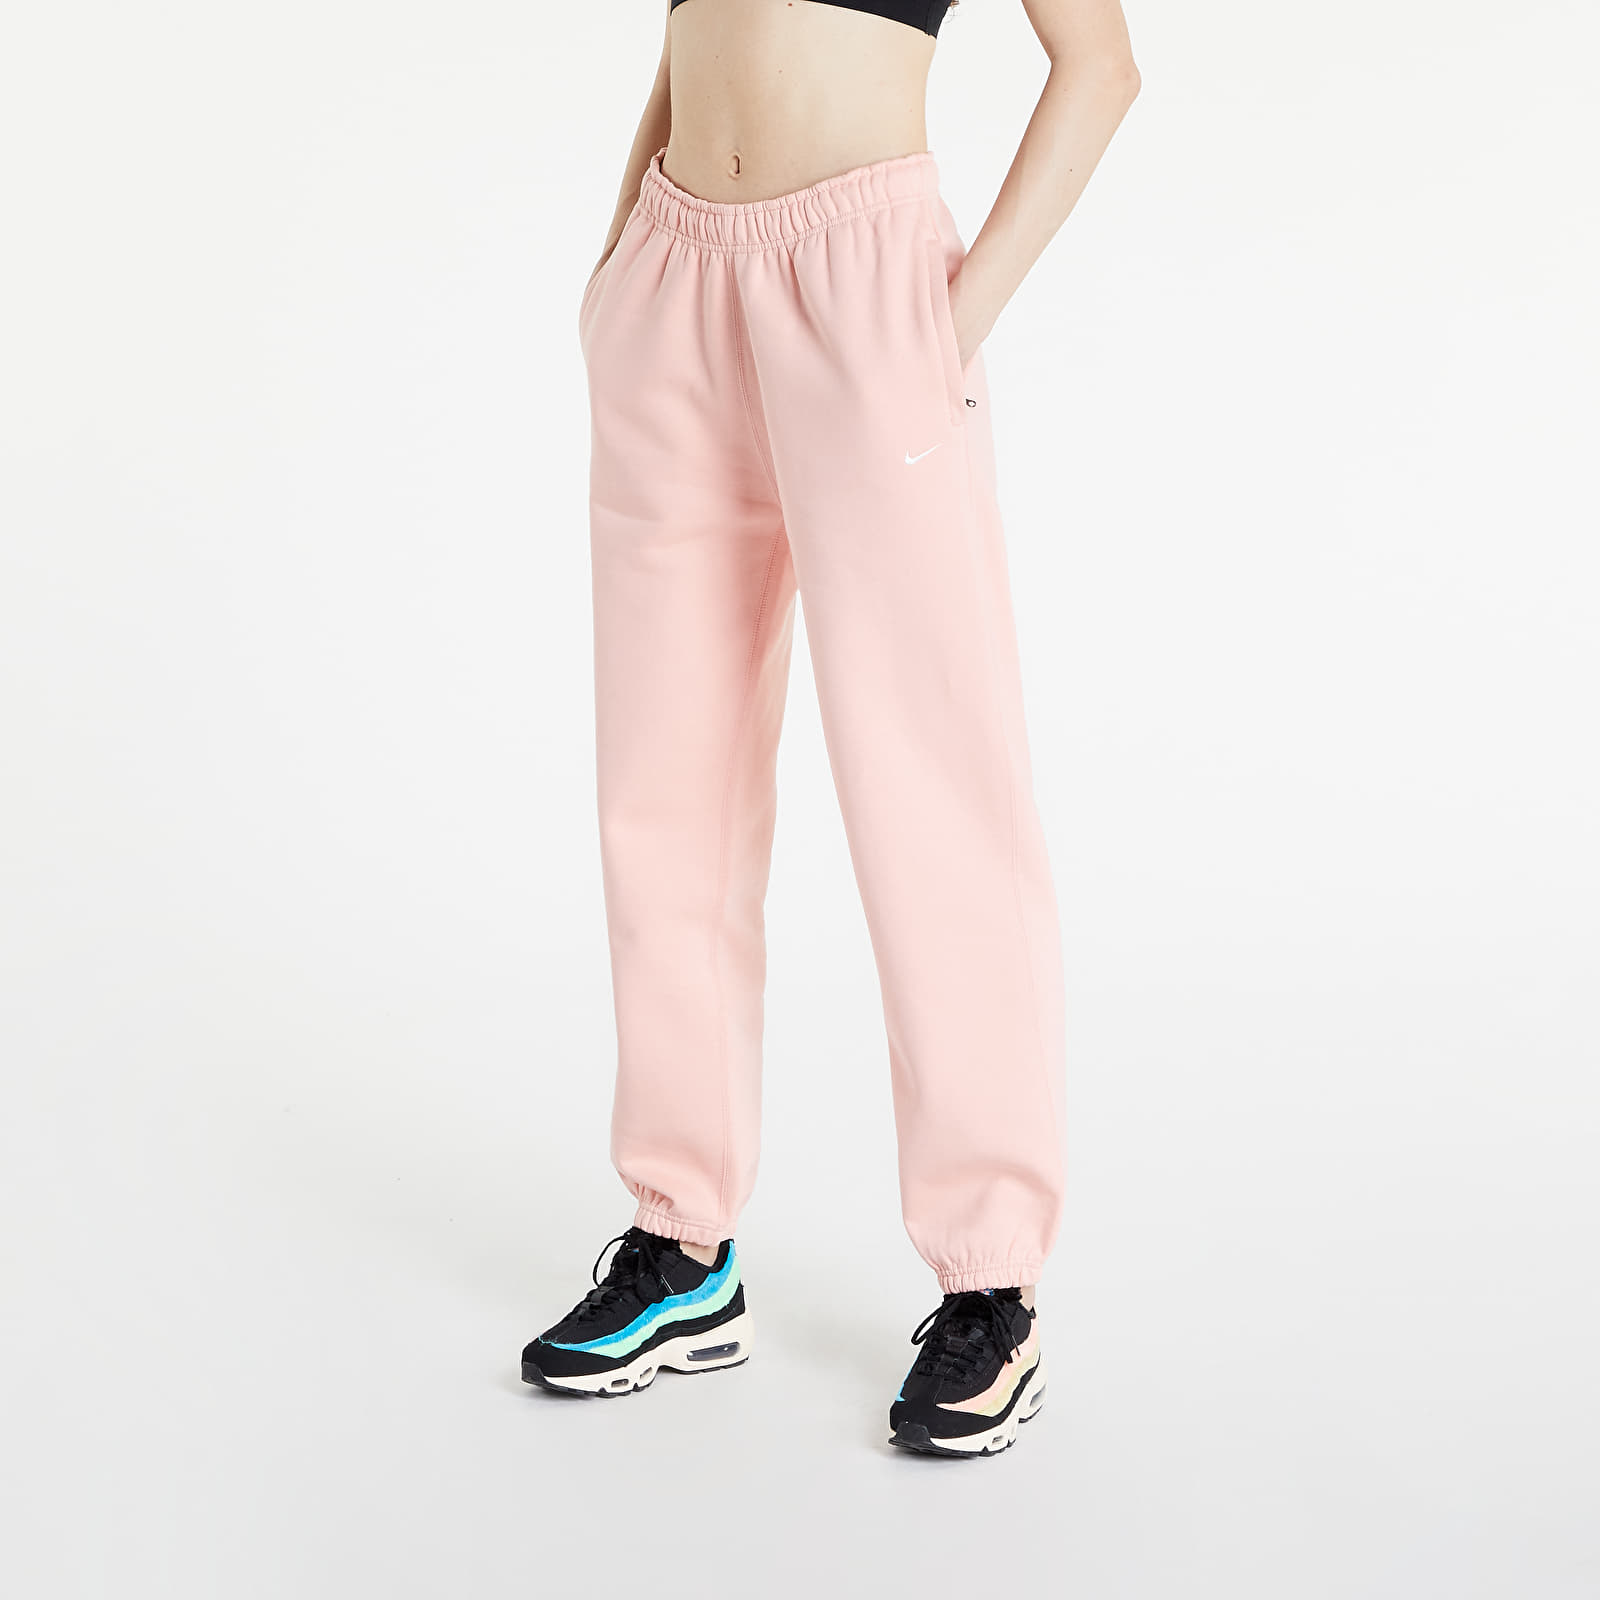 Pants and jeans NikeLab Solo Swoosh Women's Fleece Pants Bleached Coral/ White